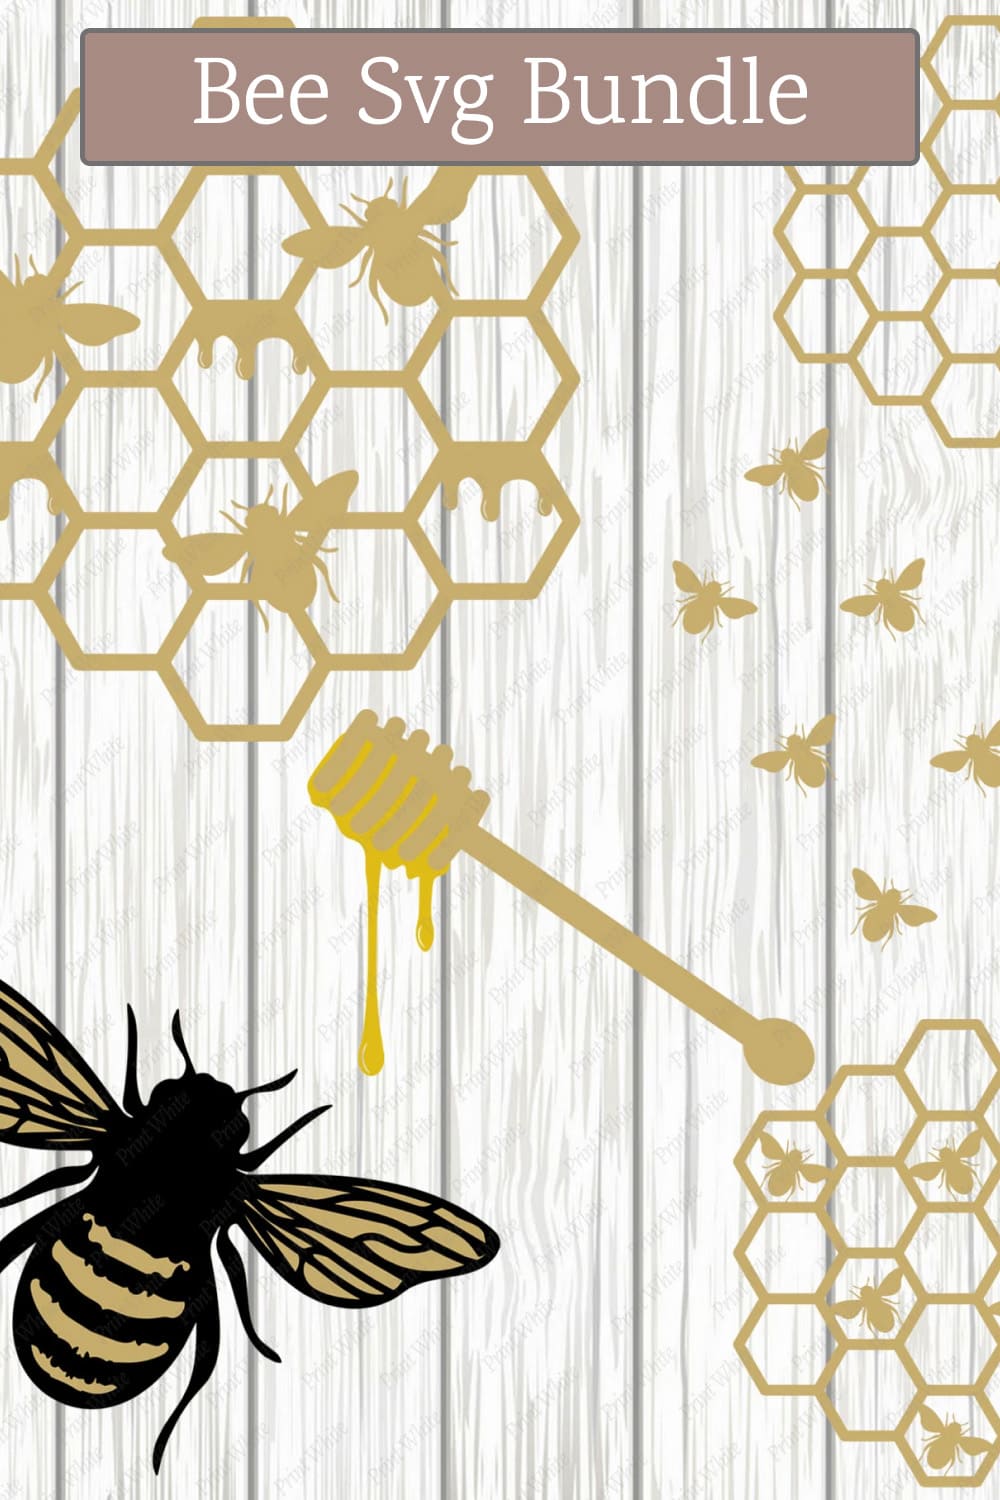 Bee with a honey comb and honey on a wooden background.